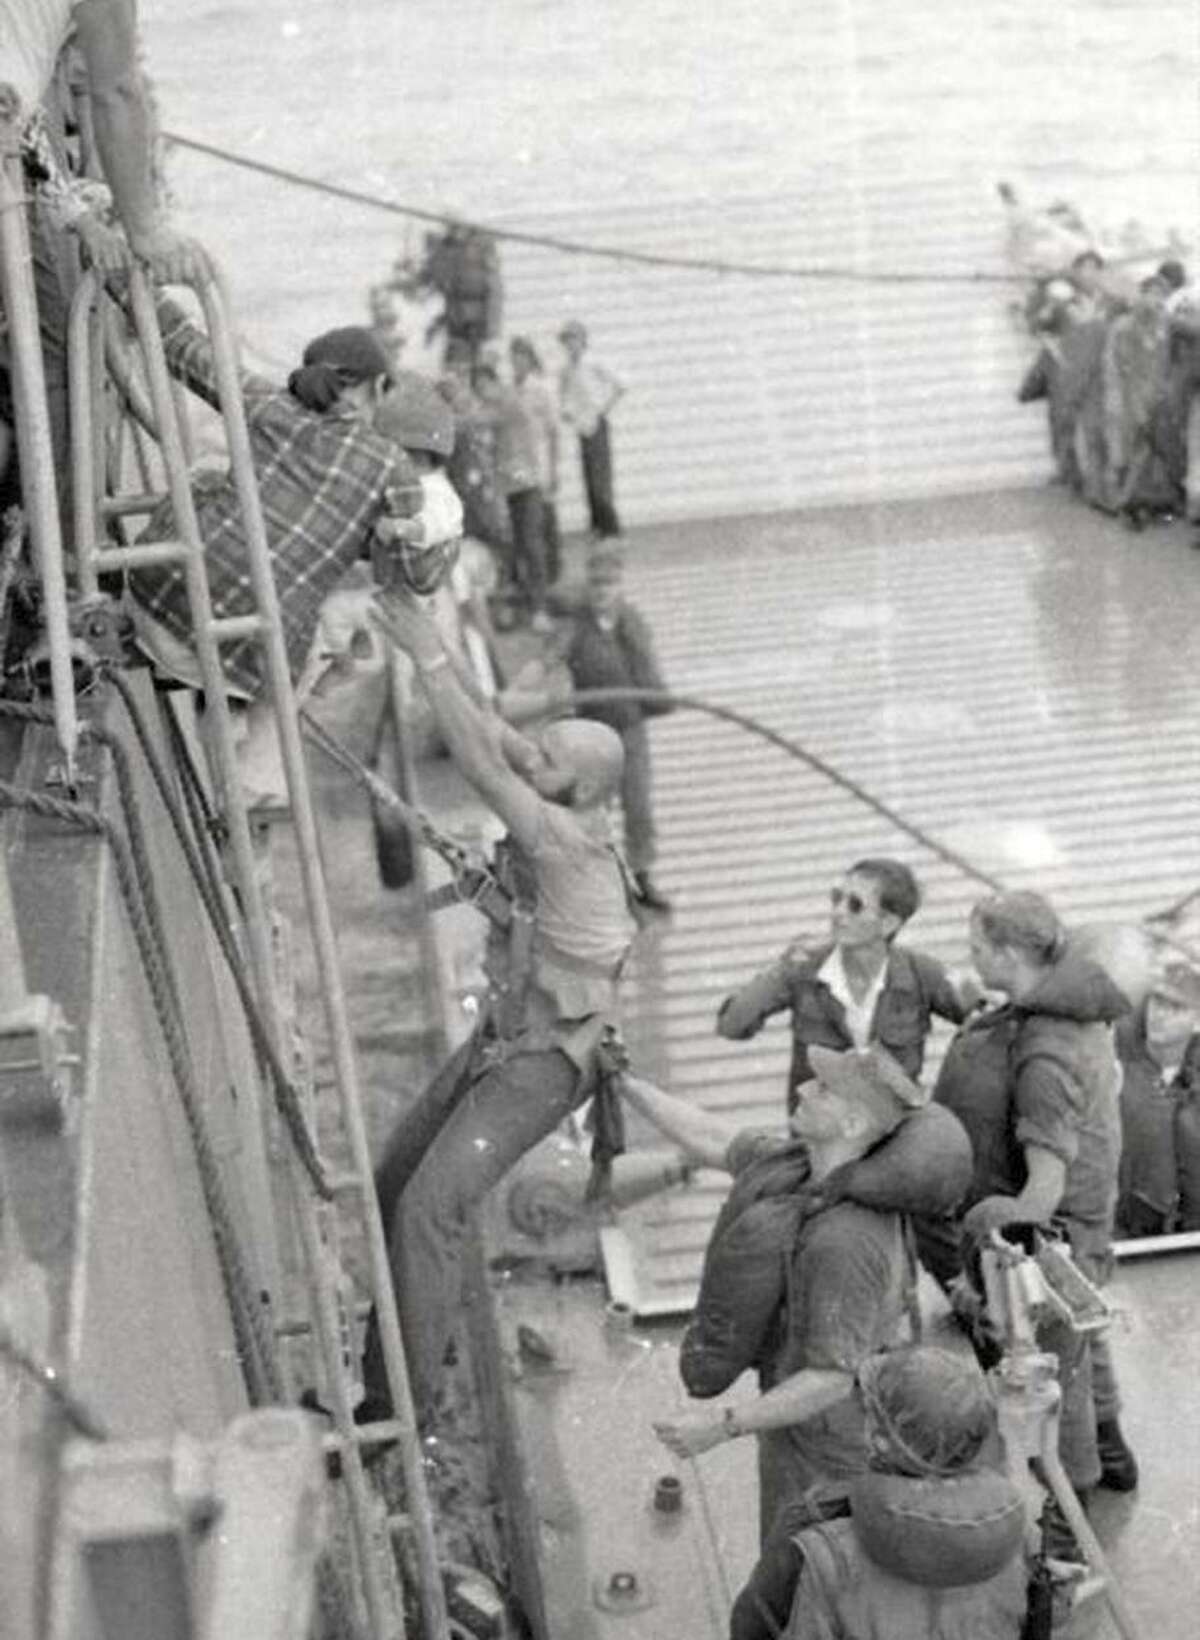 Hong Thi Le and infant An Le are helped down a ladder by sailors aboard the Blue Ridge after being flown by helicopter from Saigon in 1975. Hung Le, An’s father and the pilot of the chopper, is at the bottom of the ladder, wearing sunglasses.